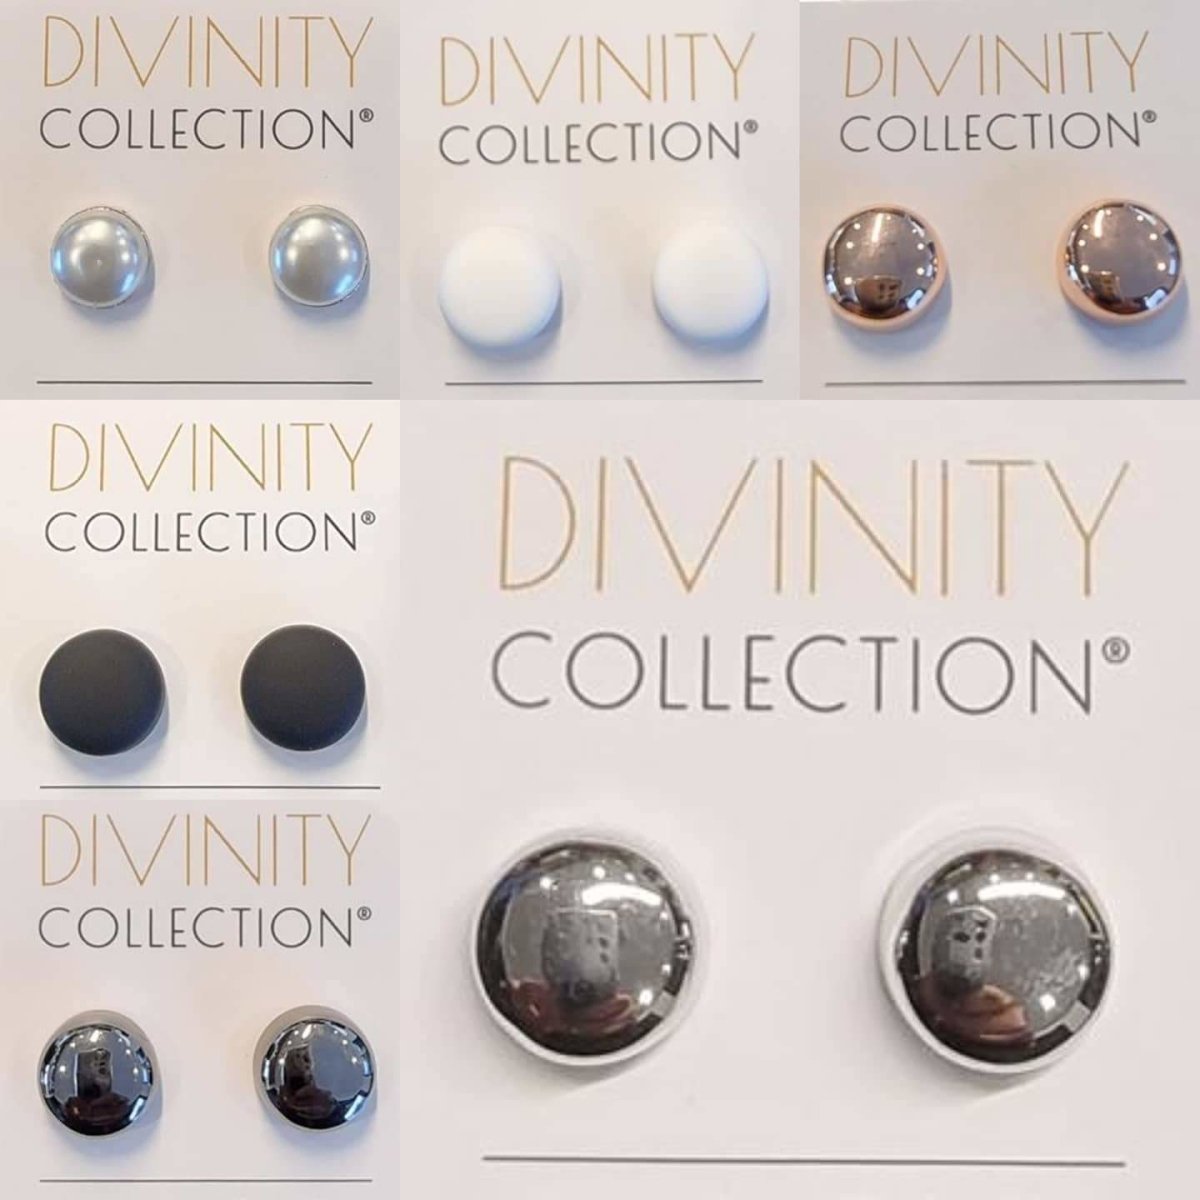 New | Hijab Pins in... - Divinity Collection